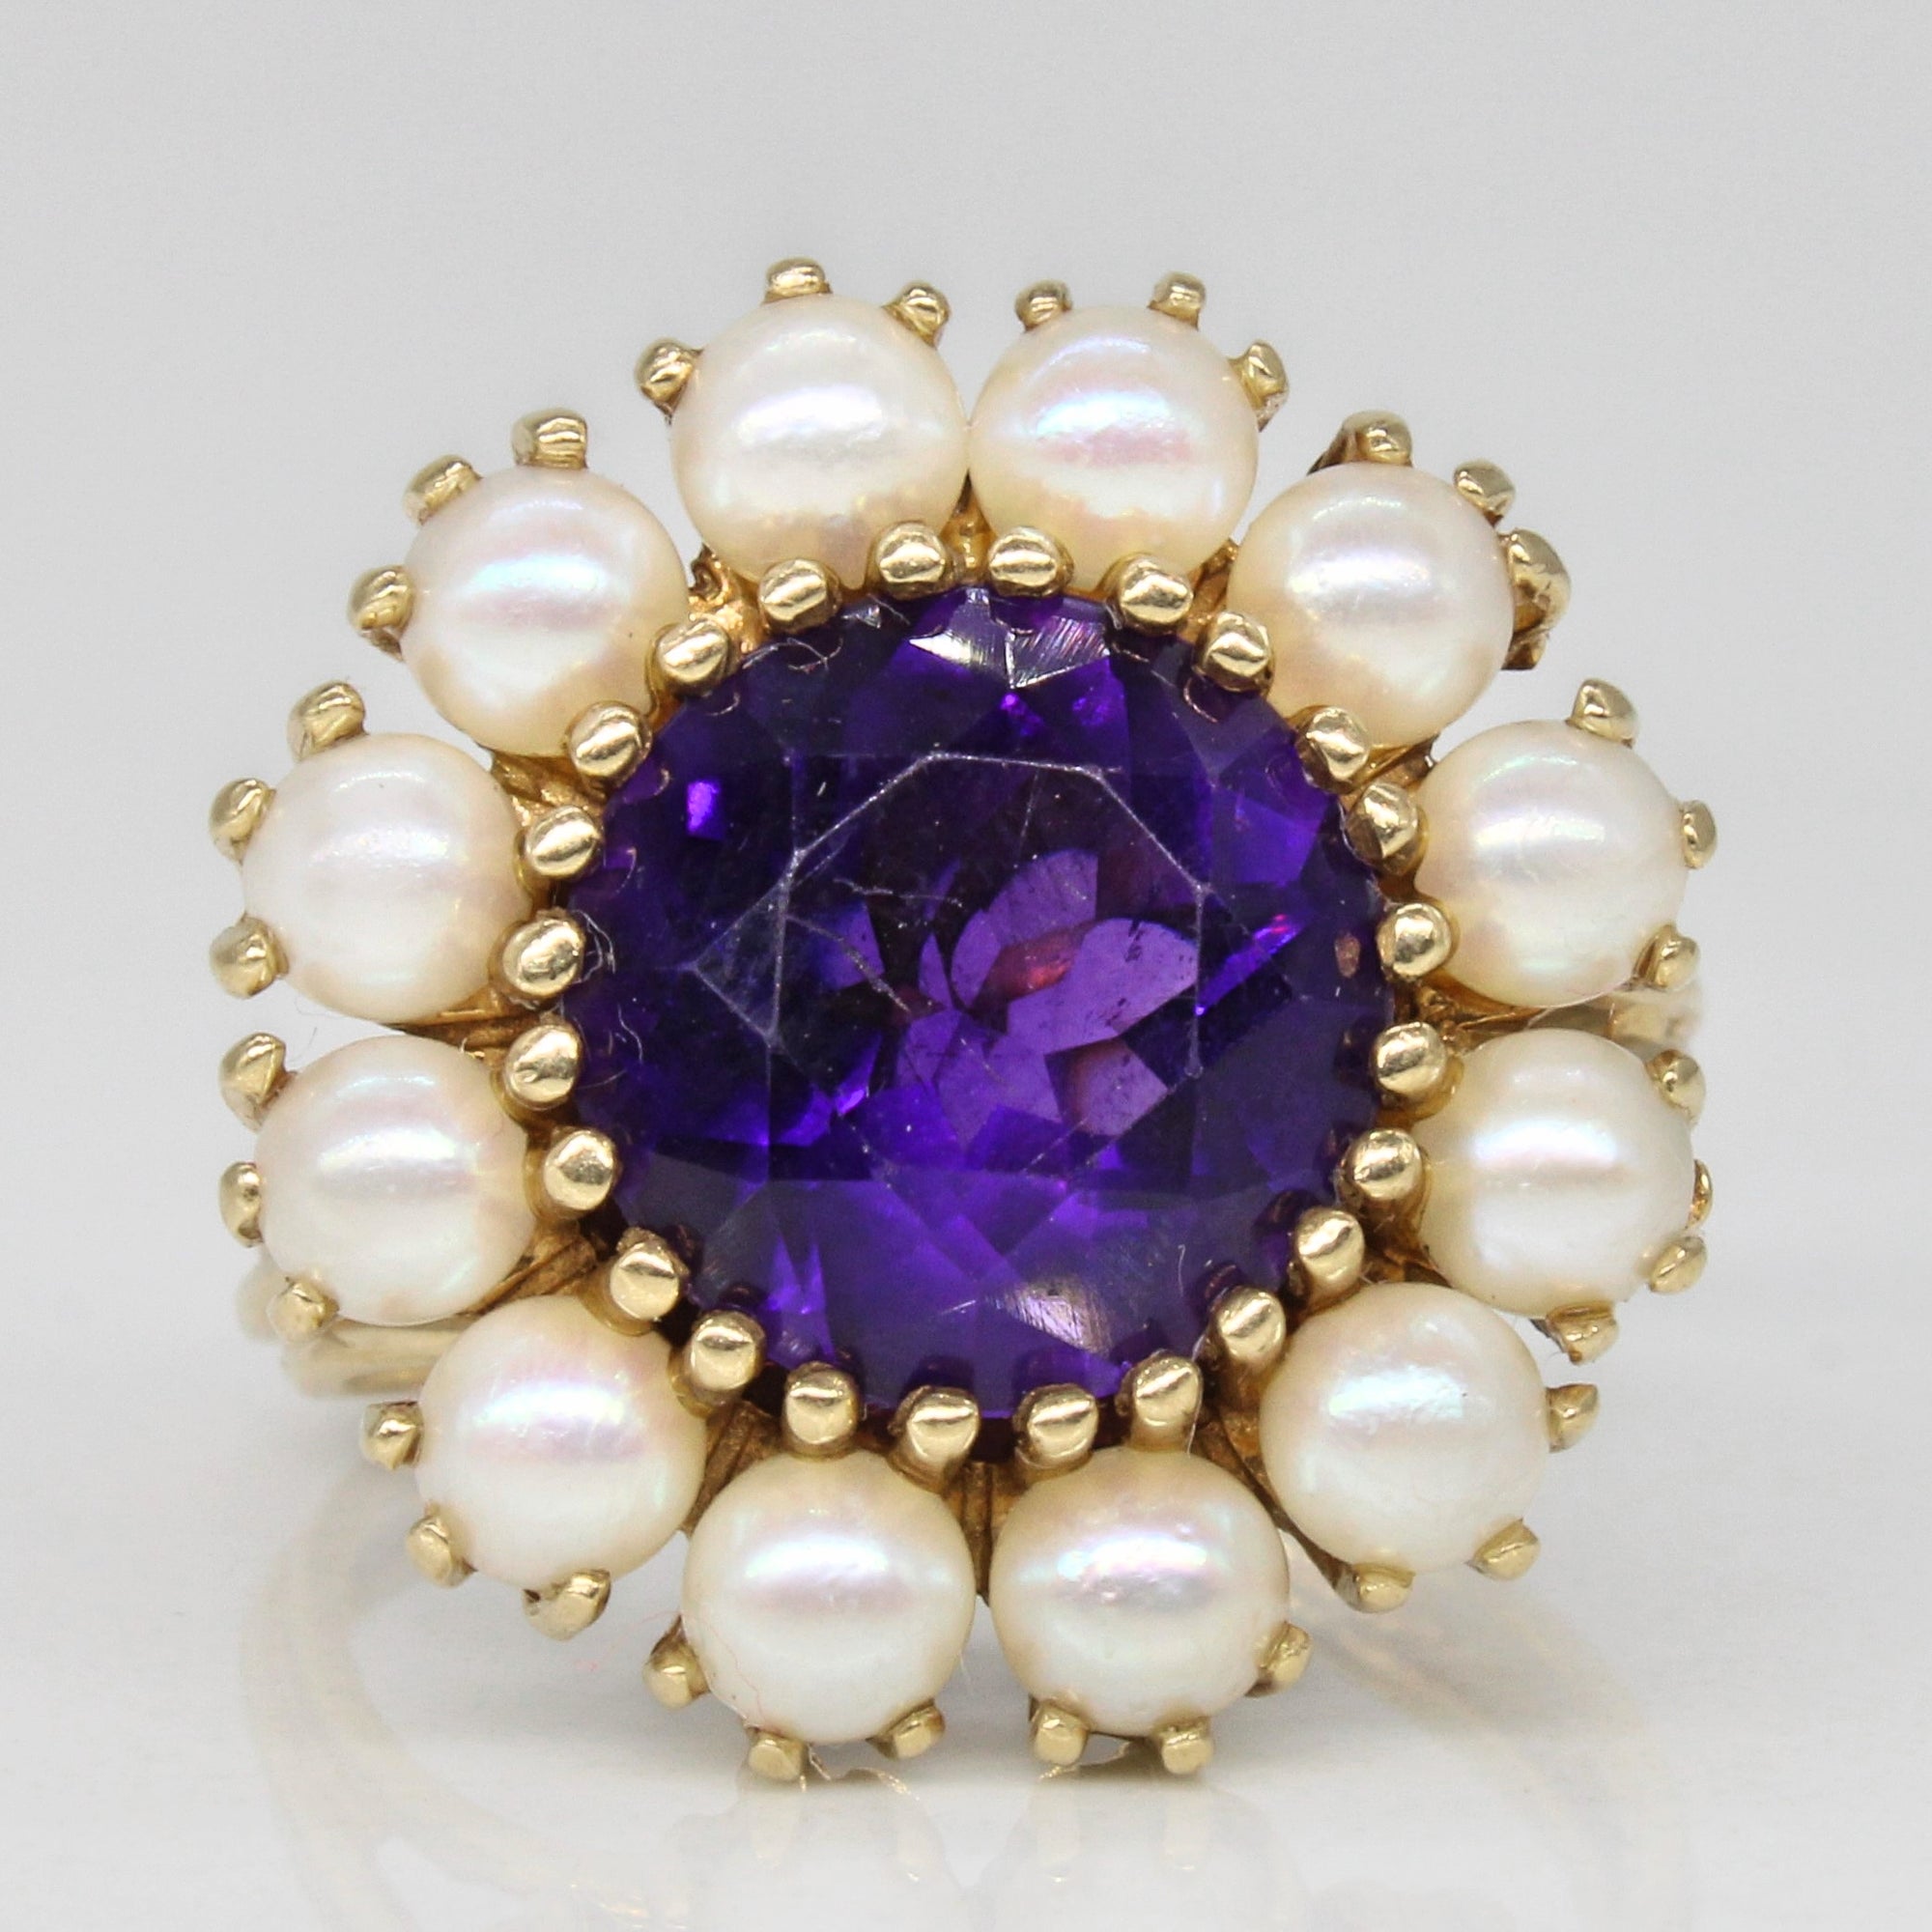 Amethyst & Pearl Cocktail Ring | 2.68ct | SZ 7.25 |